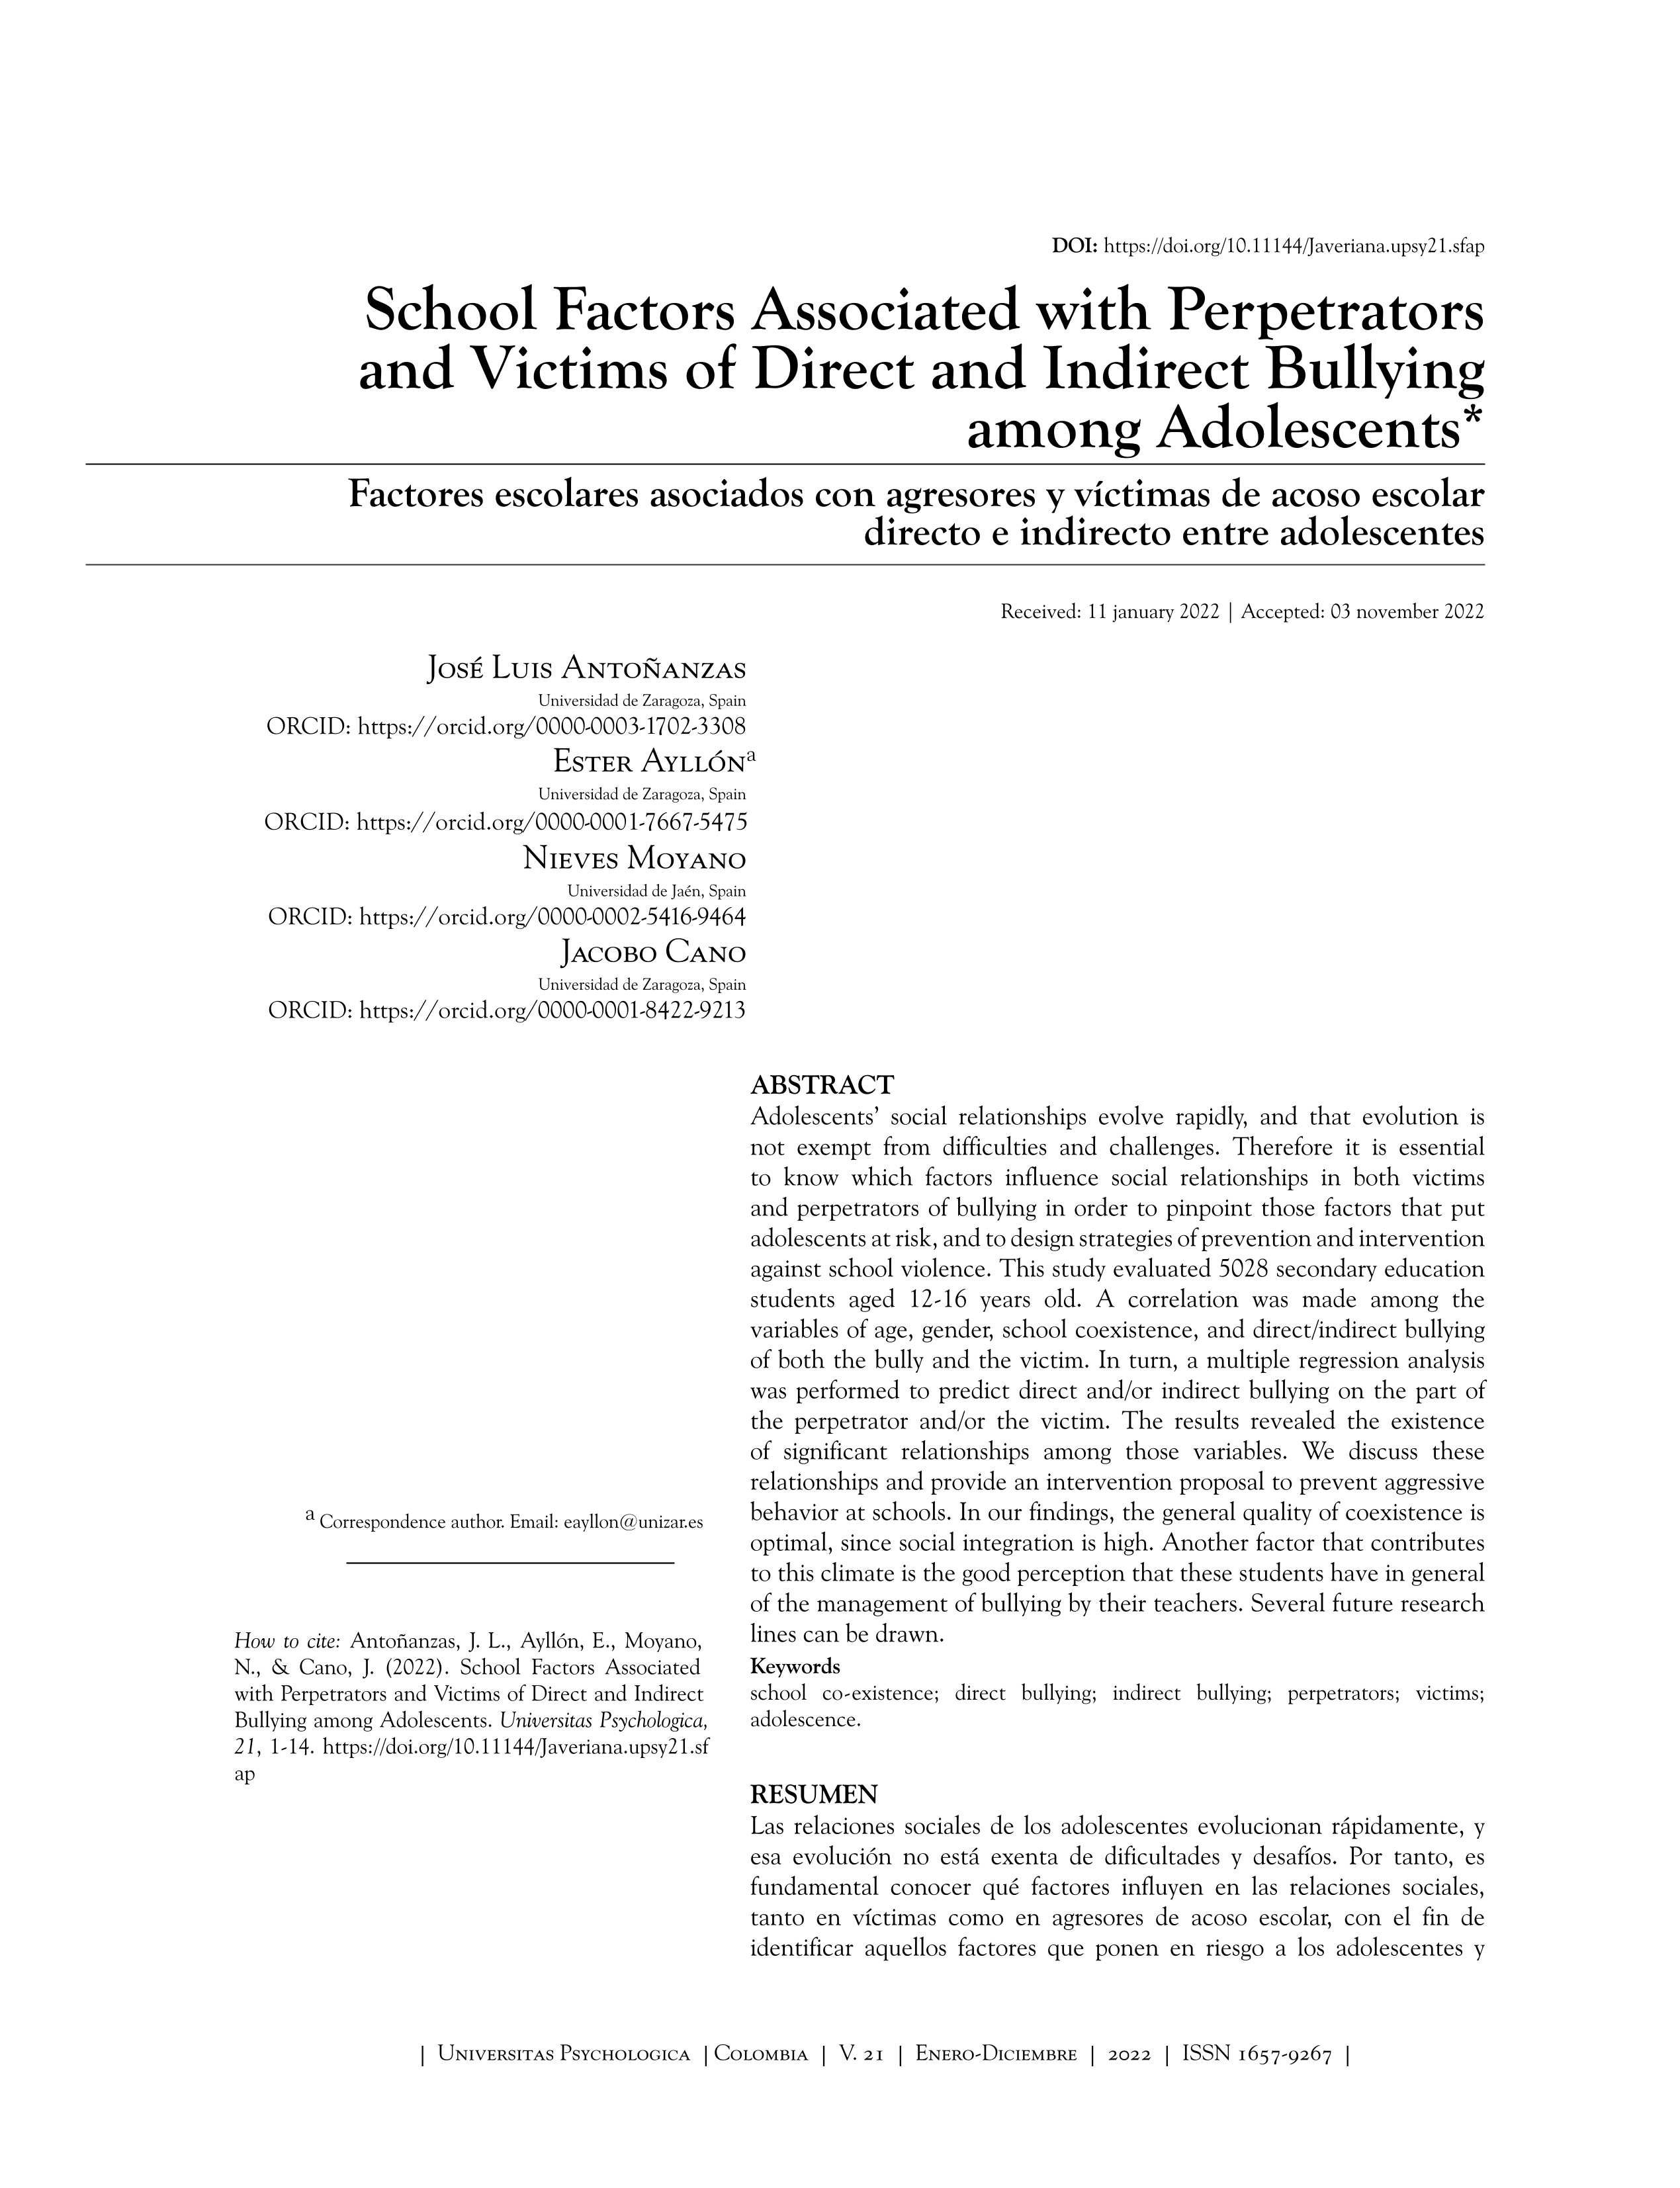 School Factors Associated with Perpetrators and Victims of Direct and Indirect Bullying among Adolescents